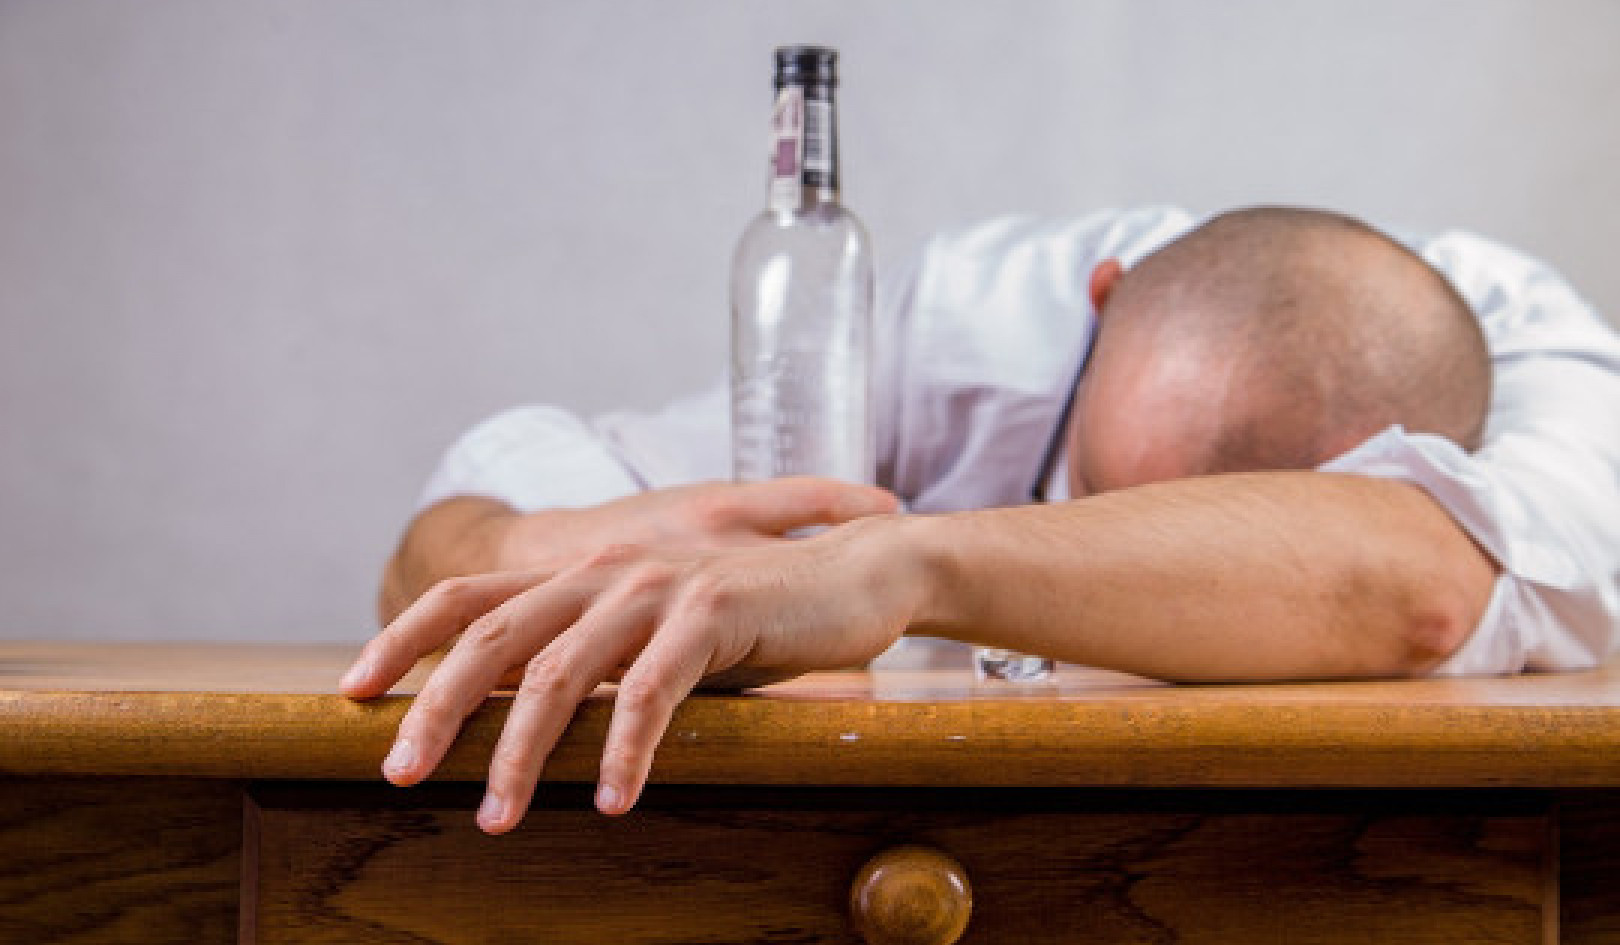 When Are People More Likely To Drink Heavily?